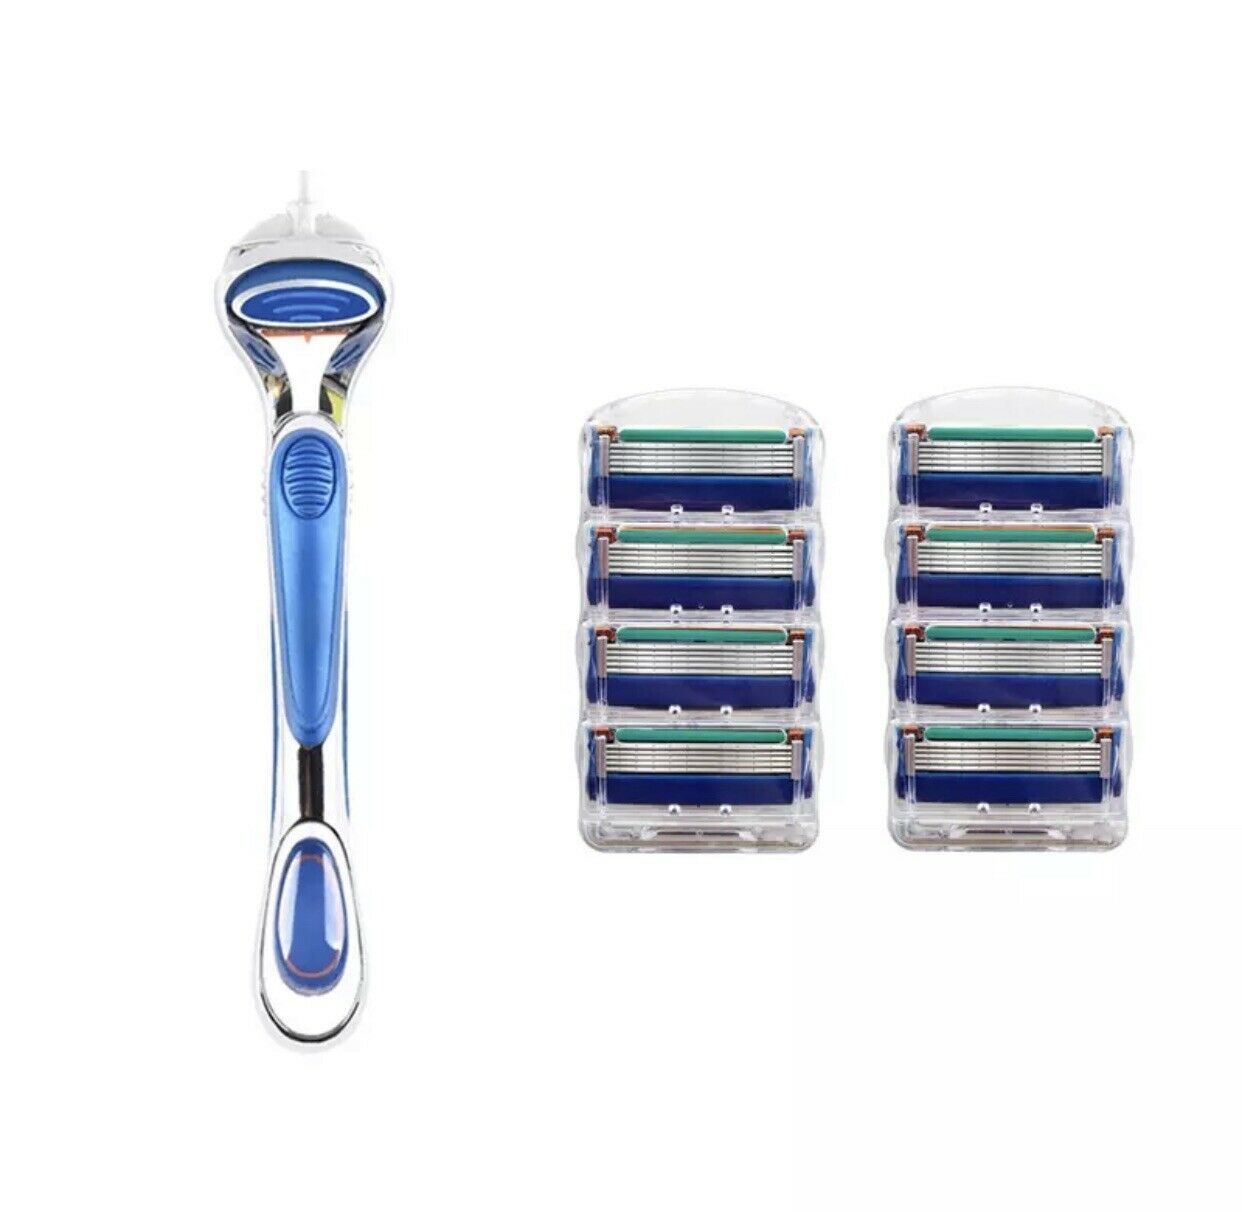 Fusion5 Shaving Razor Blade Replacement Kit With Handle And 8 Refill Cartridges